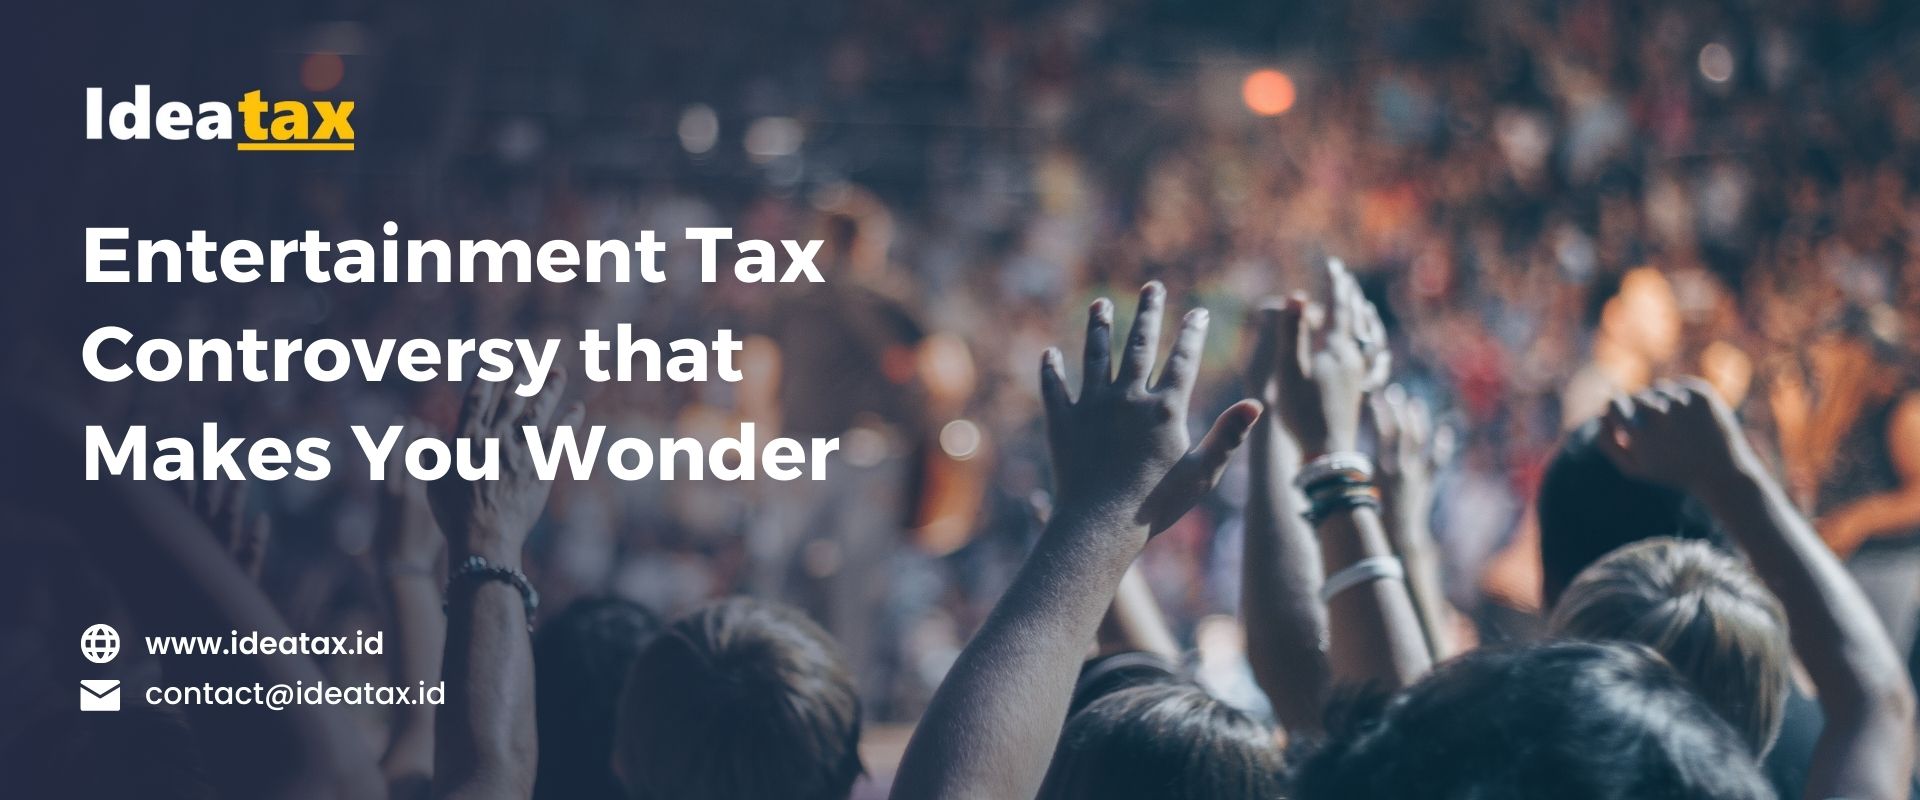 Entertainment Tax Controversy that Makes You Wonder